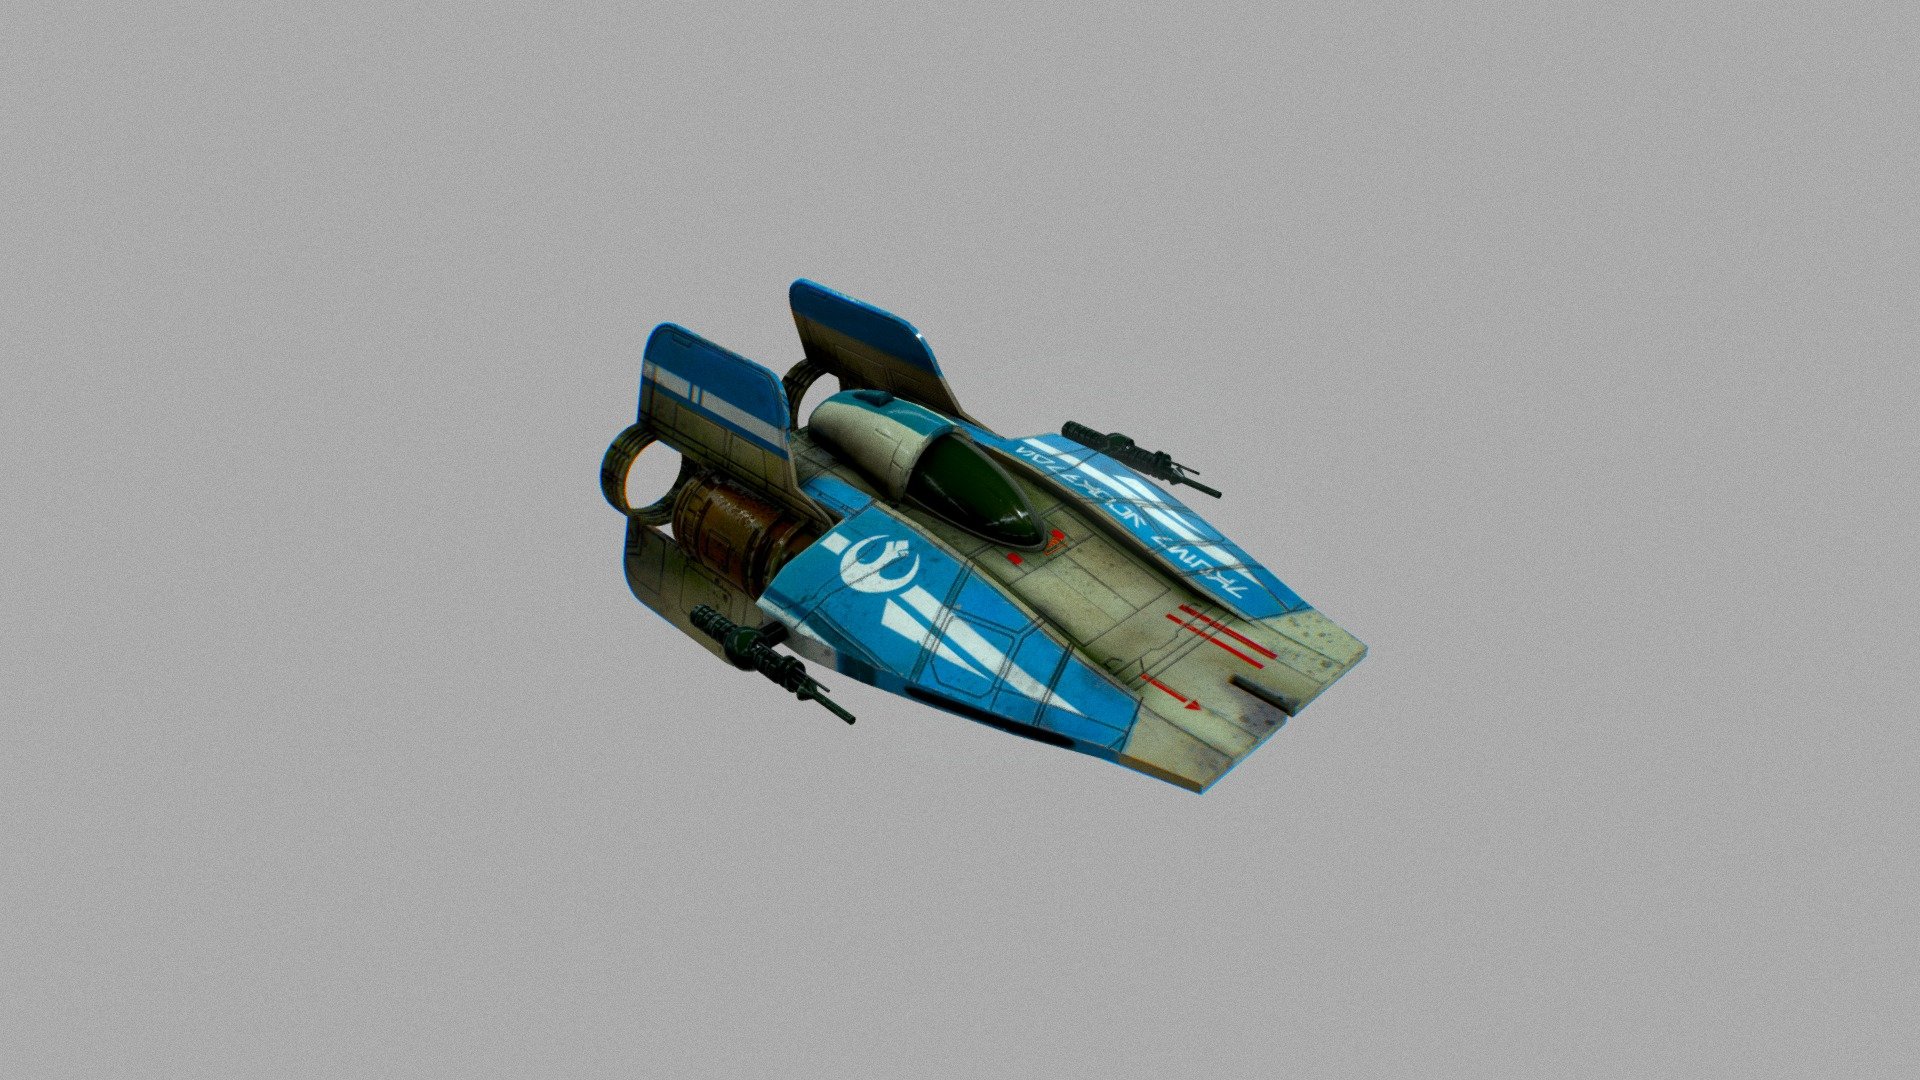 A-wing starfighter